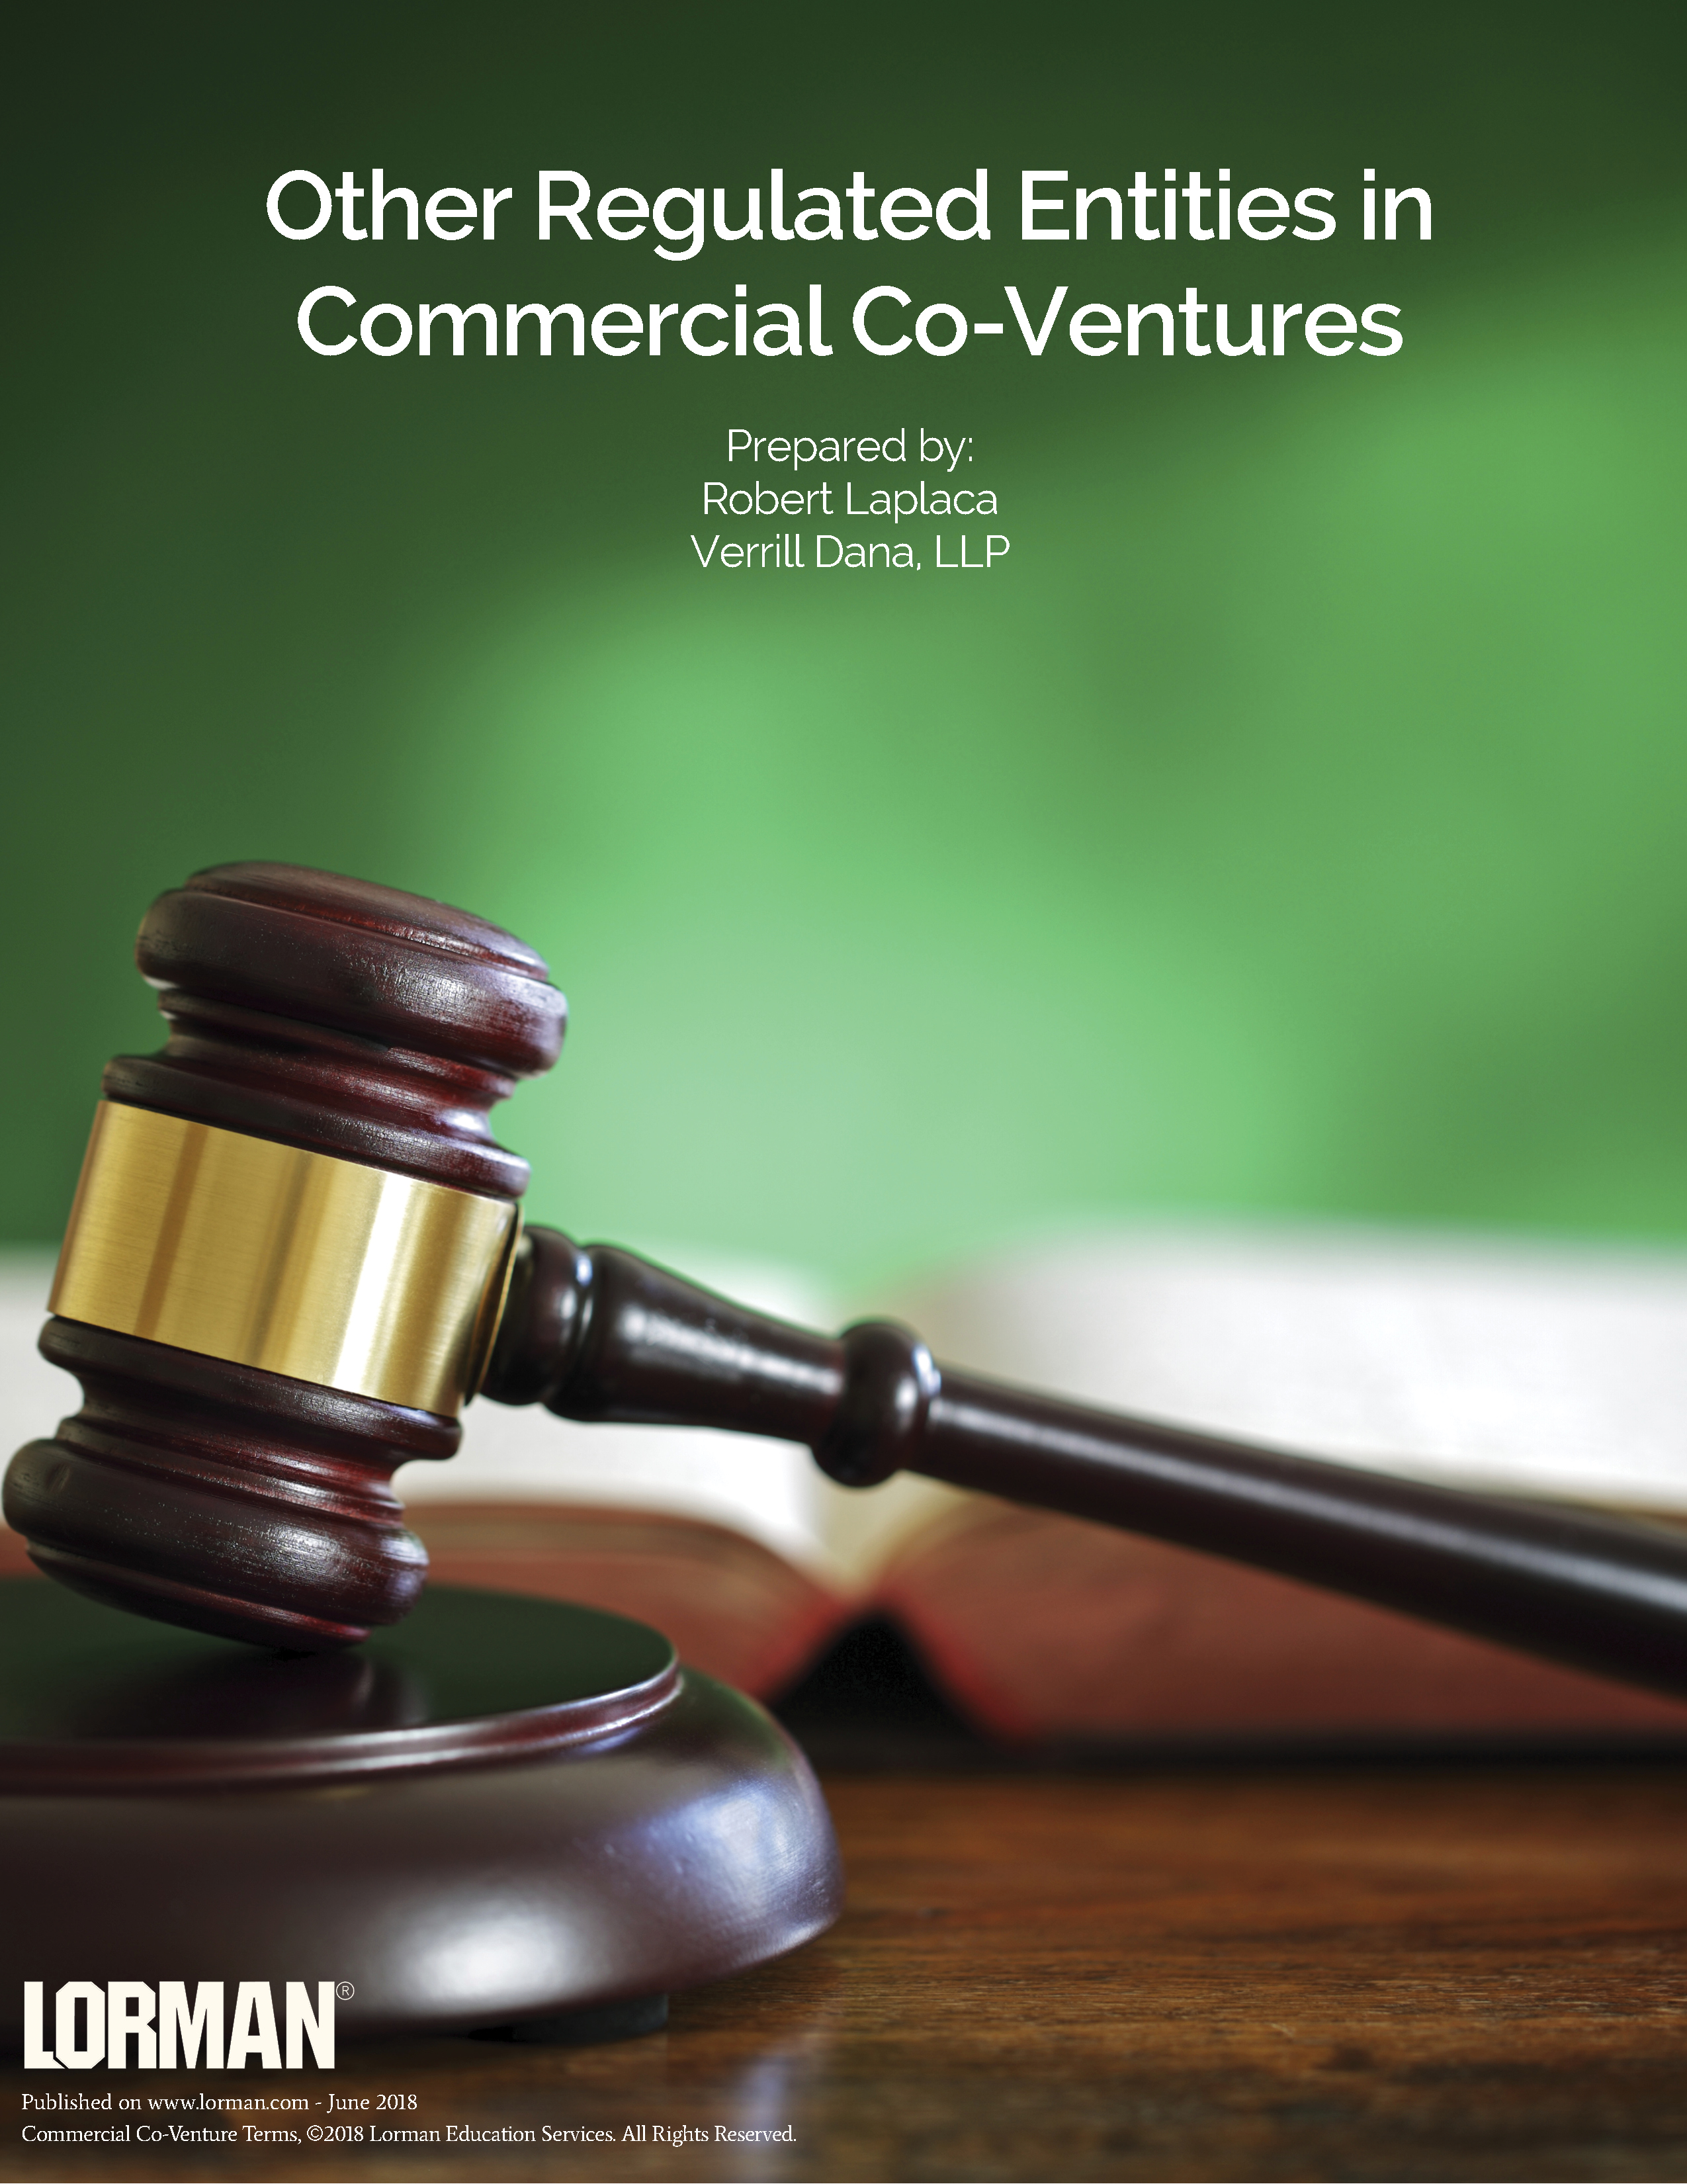 Other Regulated Entities in Commercial Co-Ventures